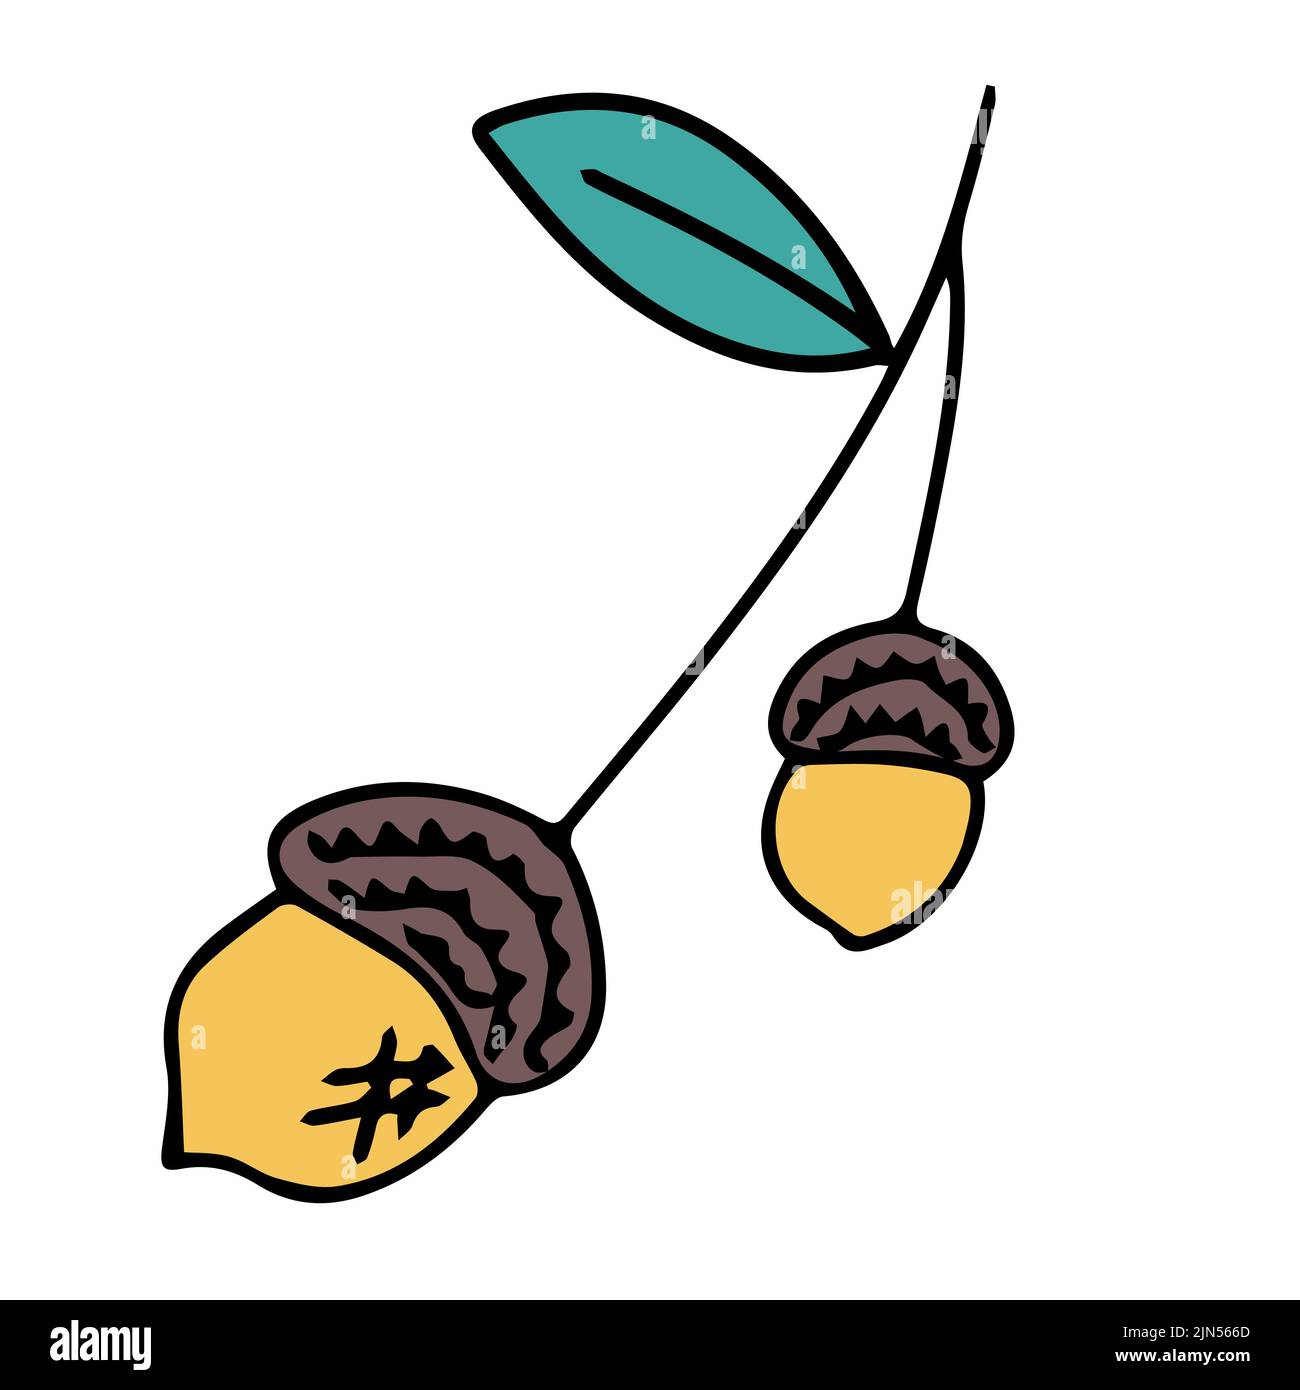 Oak cone in doodle style. Hello, Autumn. Oak fruits or seeds. Design or sticker. Isolated illustration. Vector Stock Vector